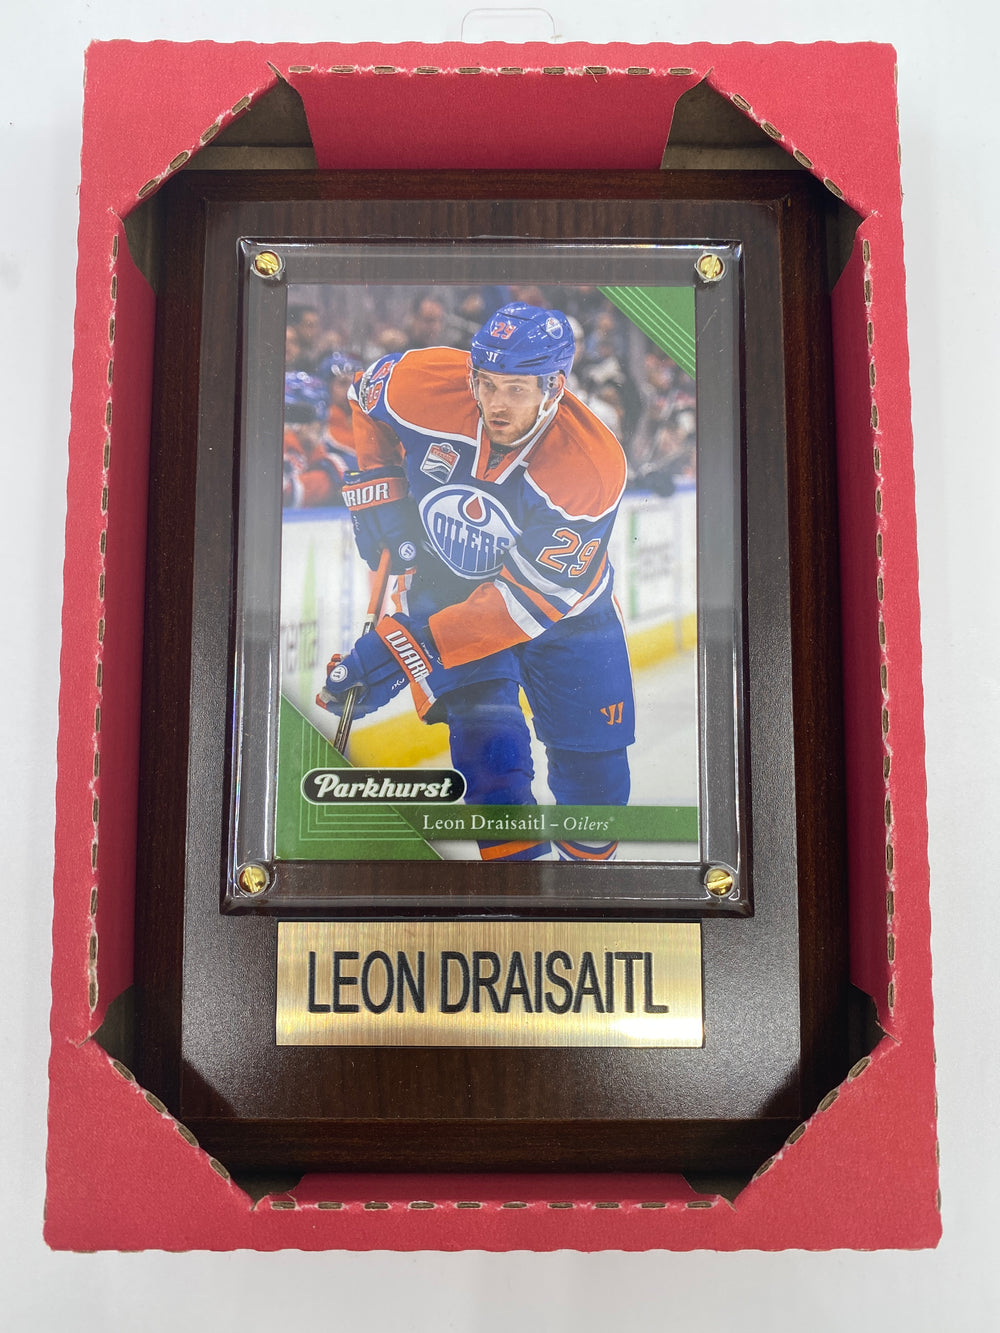 NHL Plaque with card 4x6 Oillers Leon Draisaitl